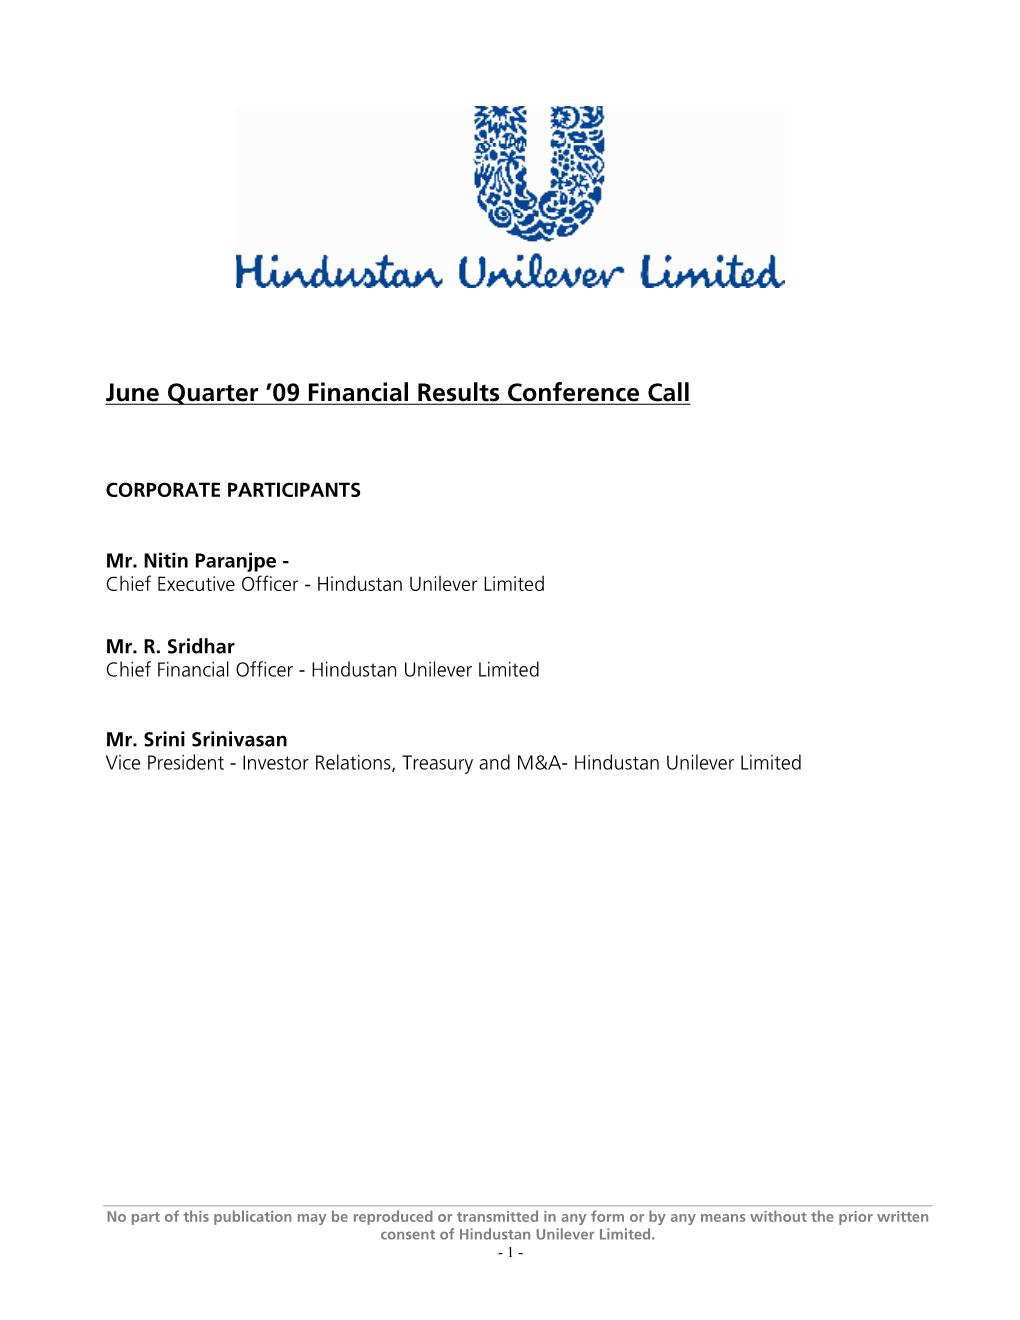 June Quarter '09 Financial Results Conference Call